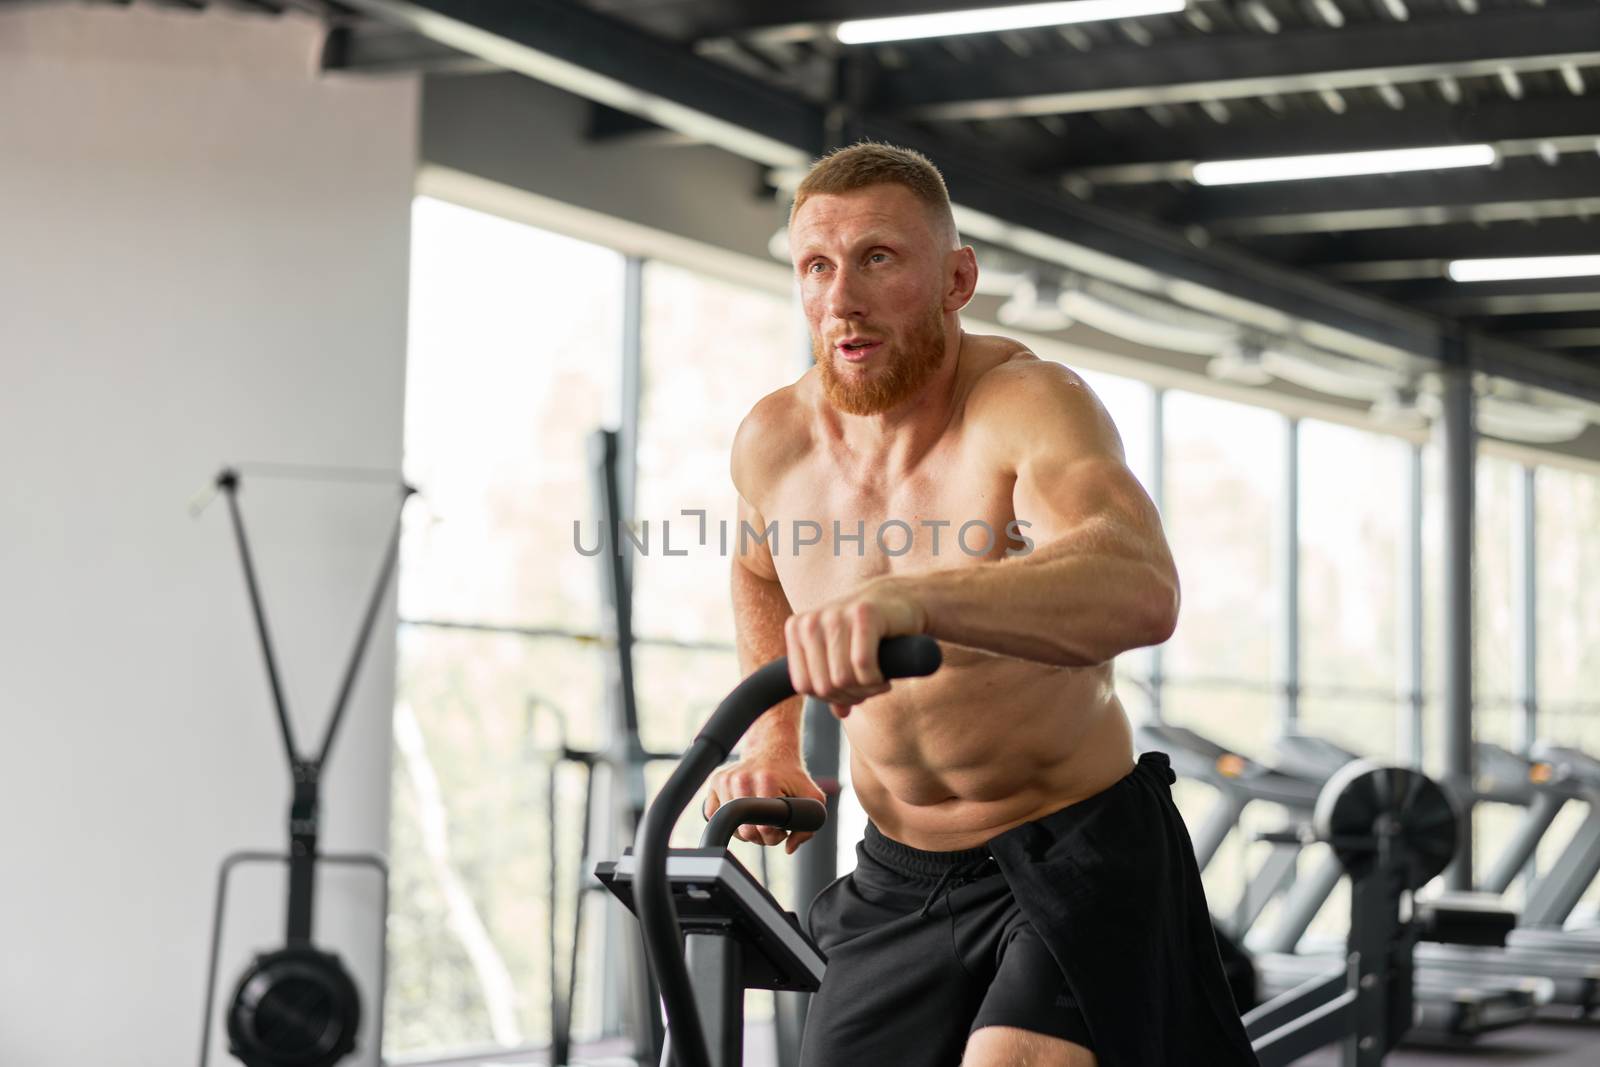 Man exercise bike gym cycling training fitness. Fitness male using air bike cardio workout. Athlete guy naked torso biking indoor gym exercising his legs. Cross functional training.